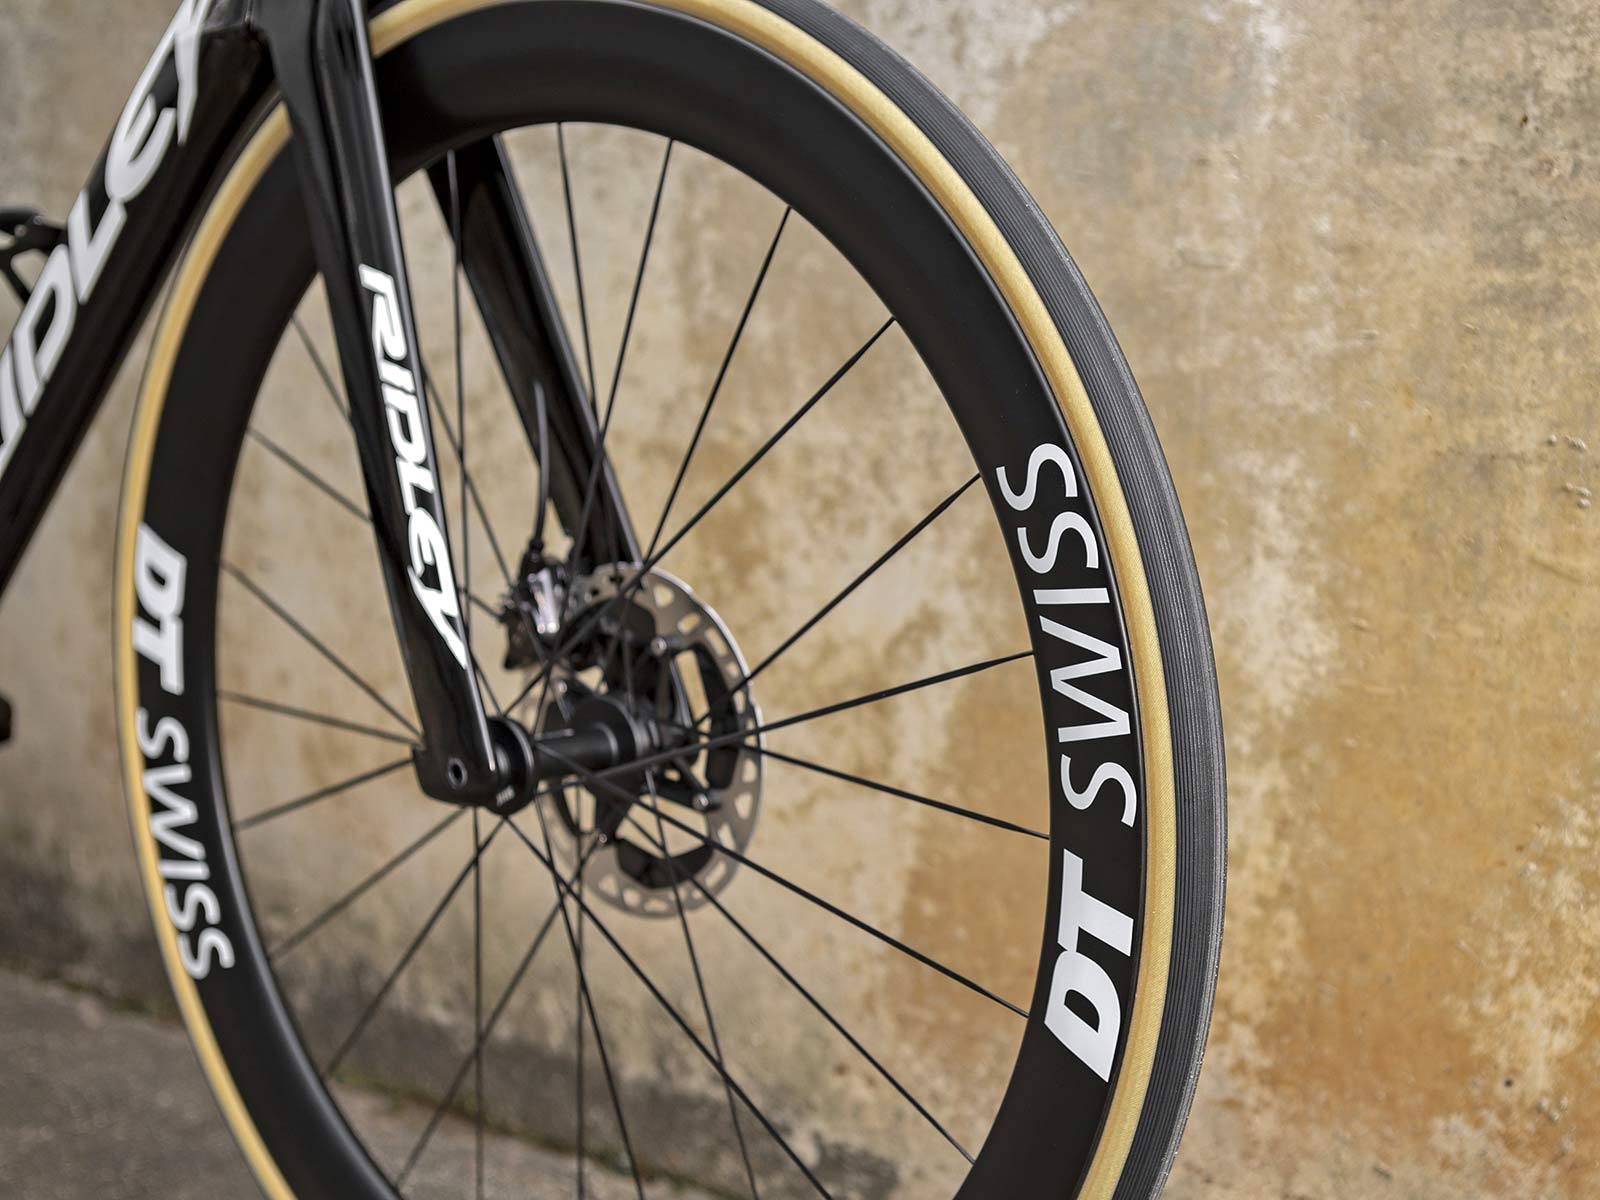 DT Swiss and Ridley sponsor Lotto Soudal with road tubeless wheels for 2022 World Tour, front wheel